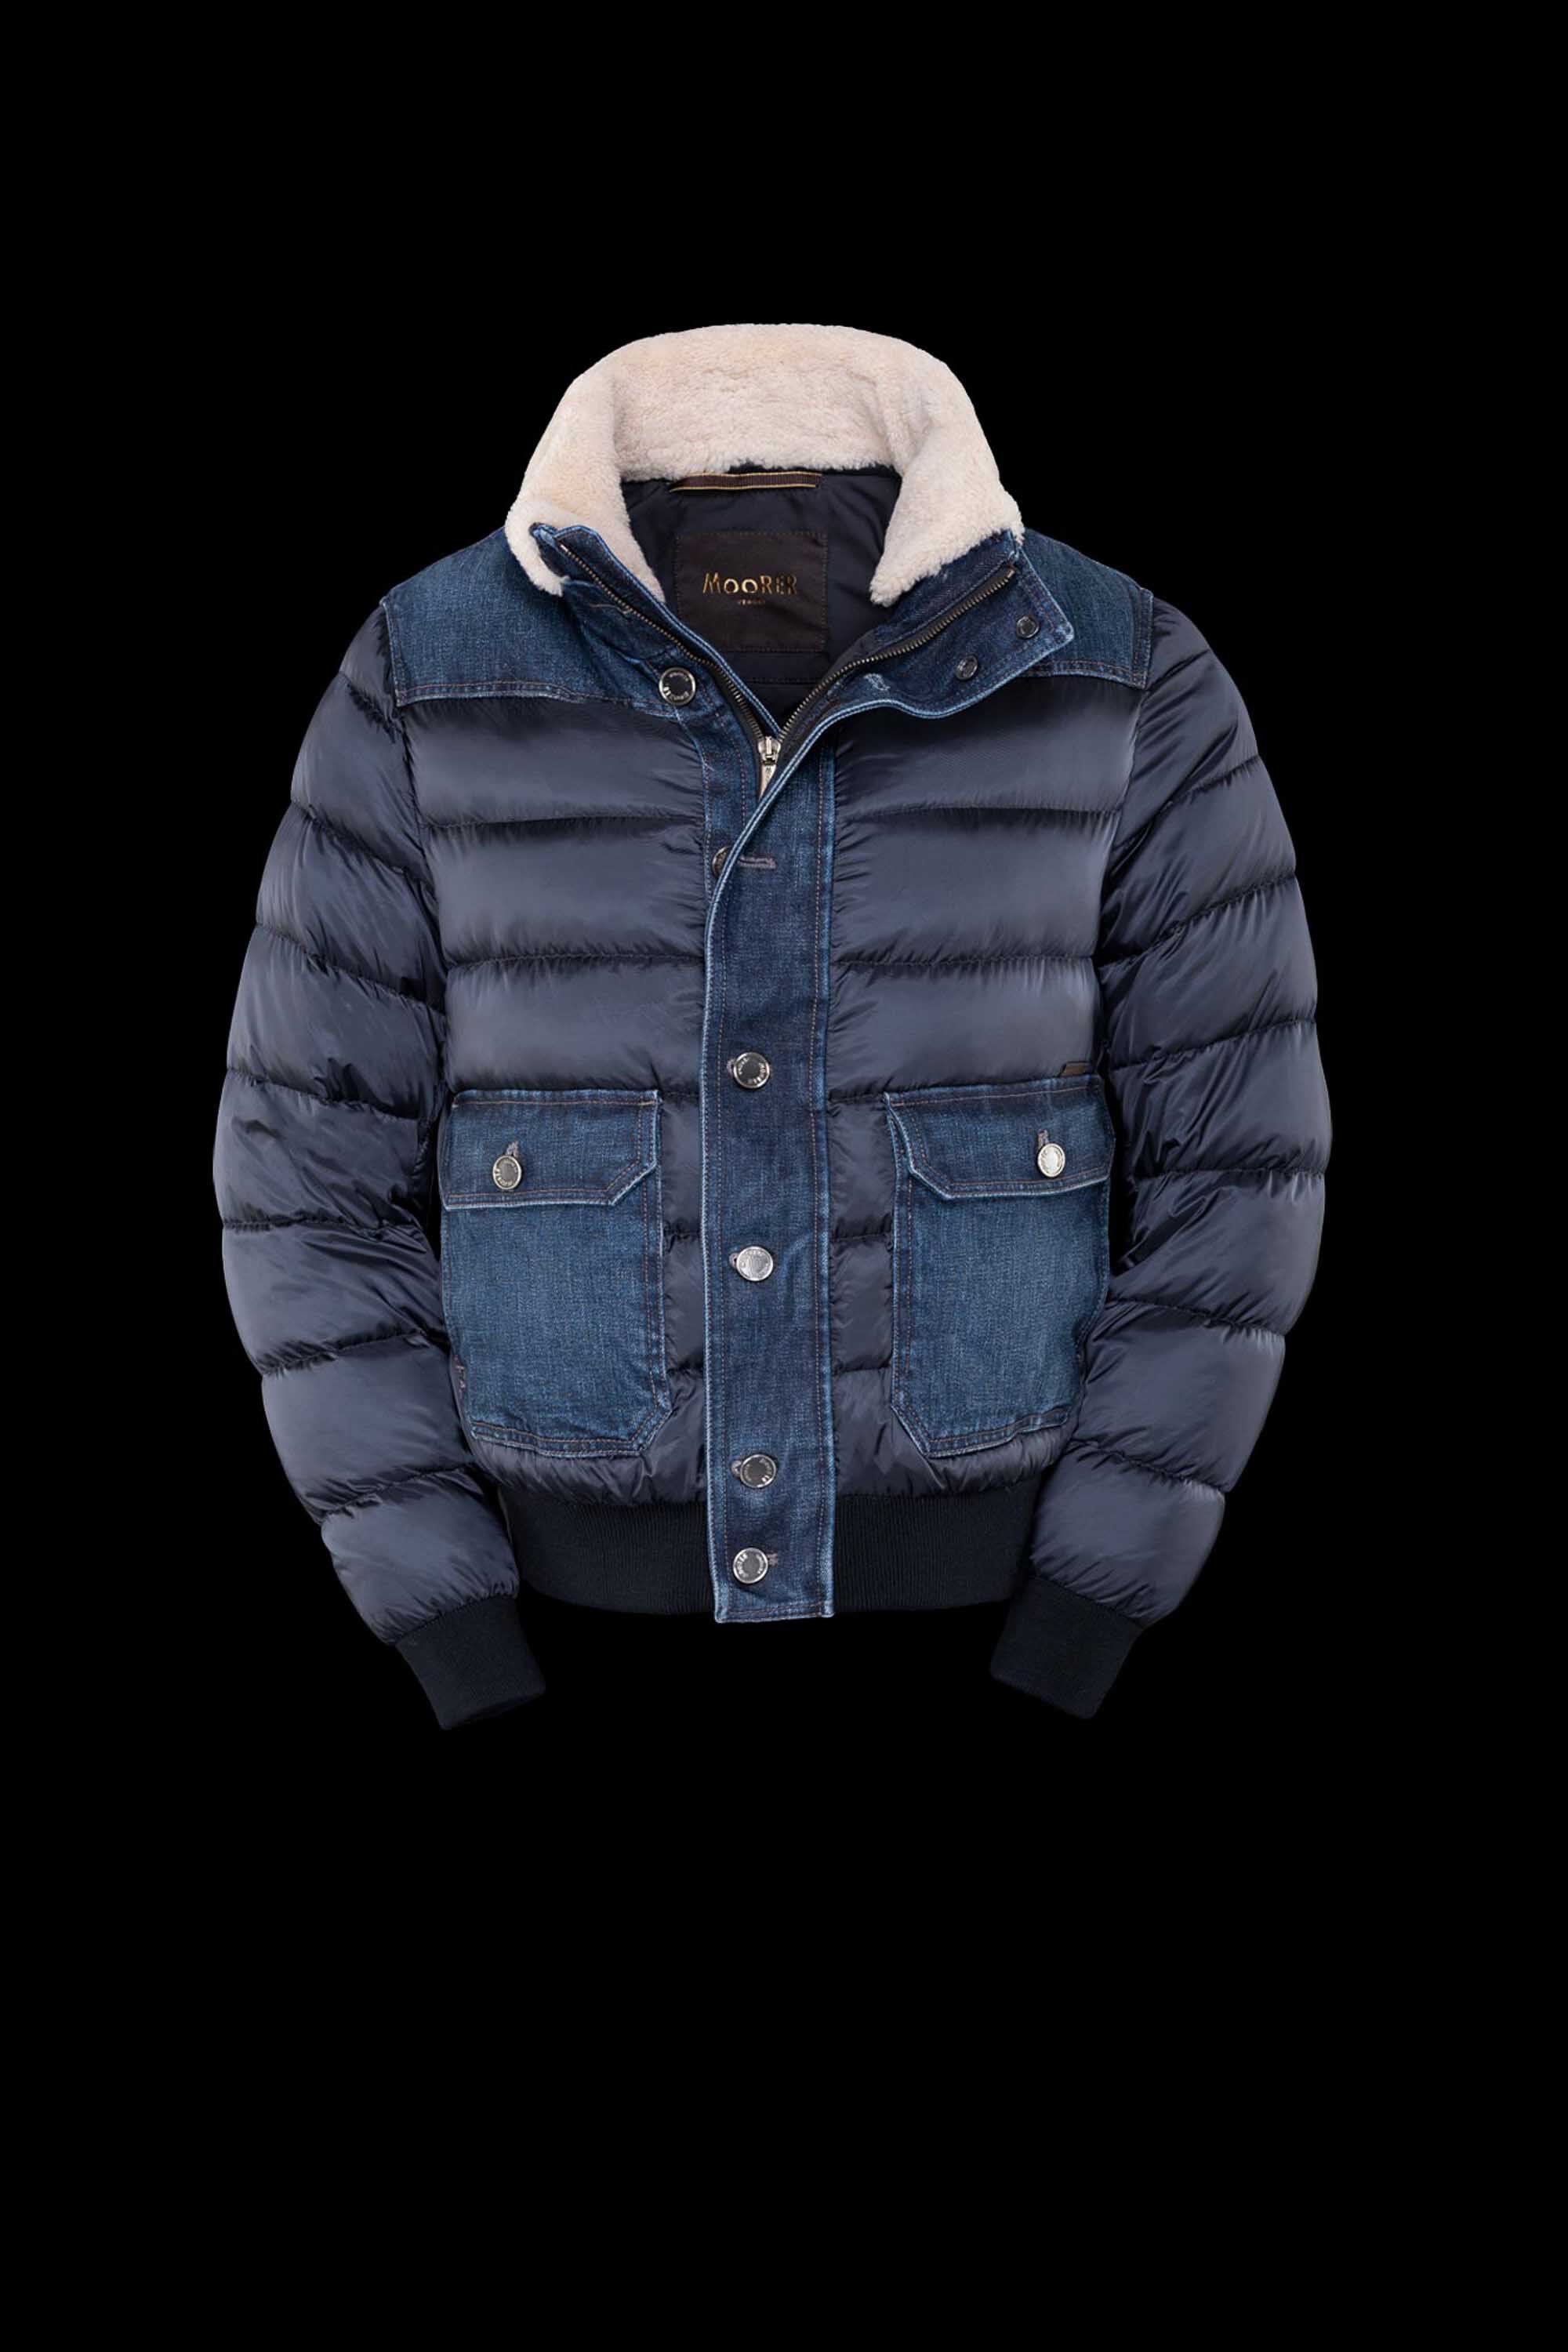 Men's Outerwear: Luxury Coats and Jackets made in Italy | MooRER®